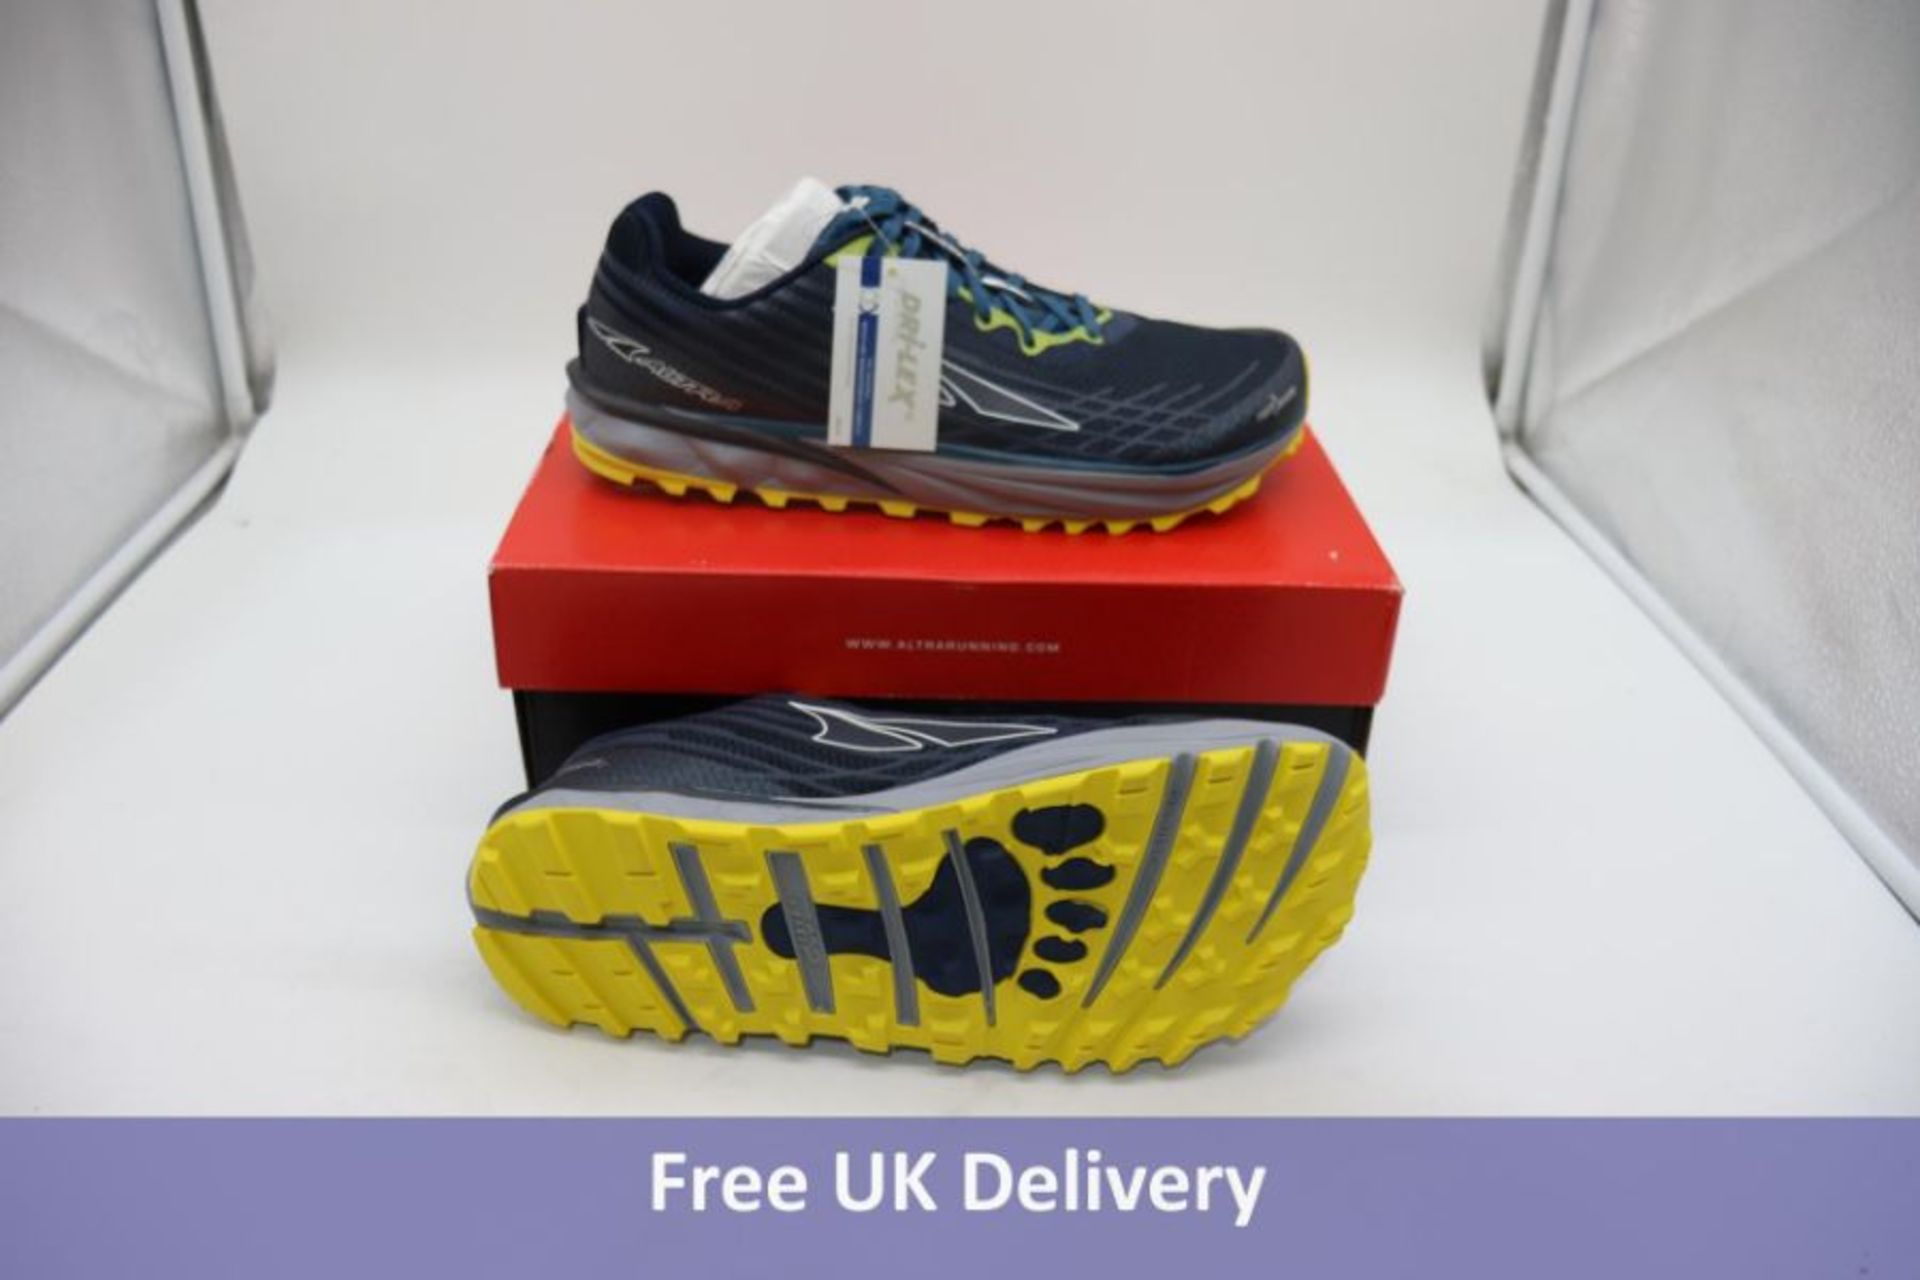 Altra Timp 2 Mens Trainers, Blue/Yellow, UK 10